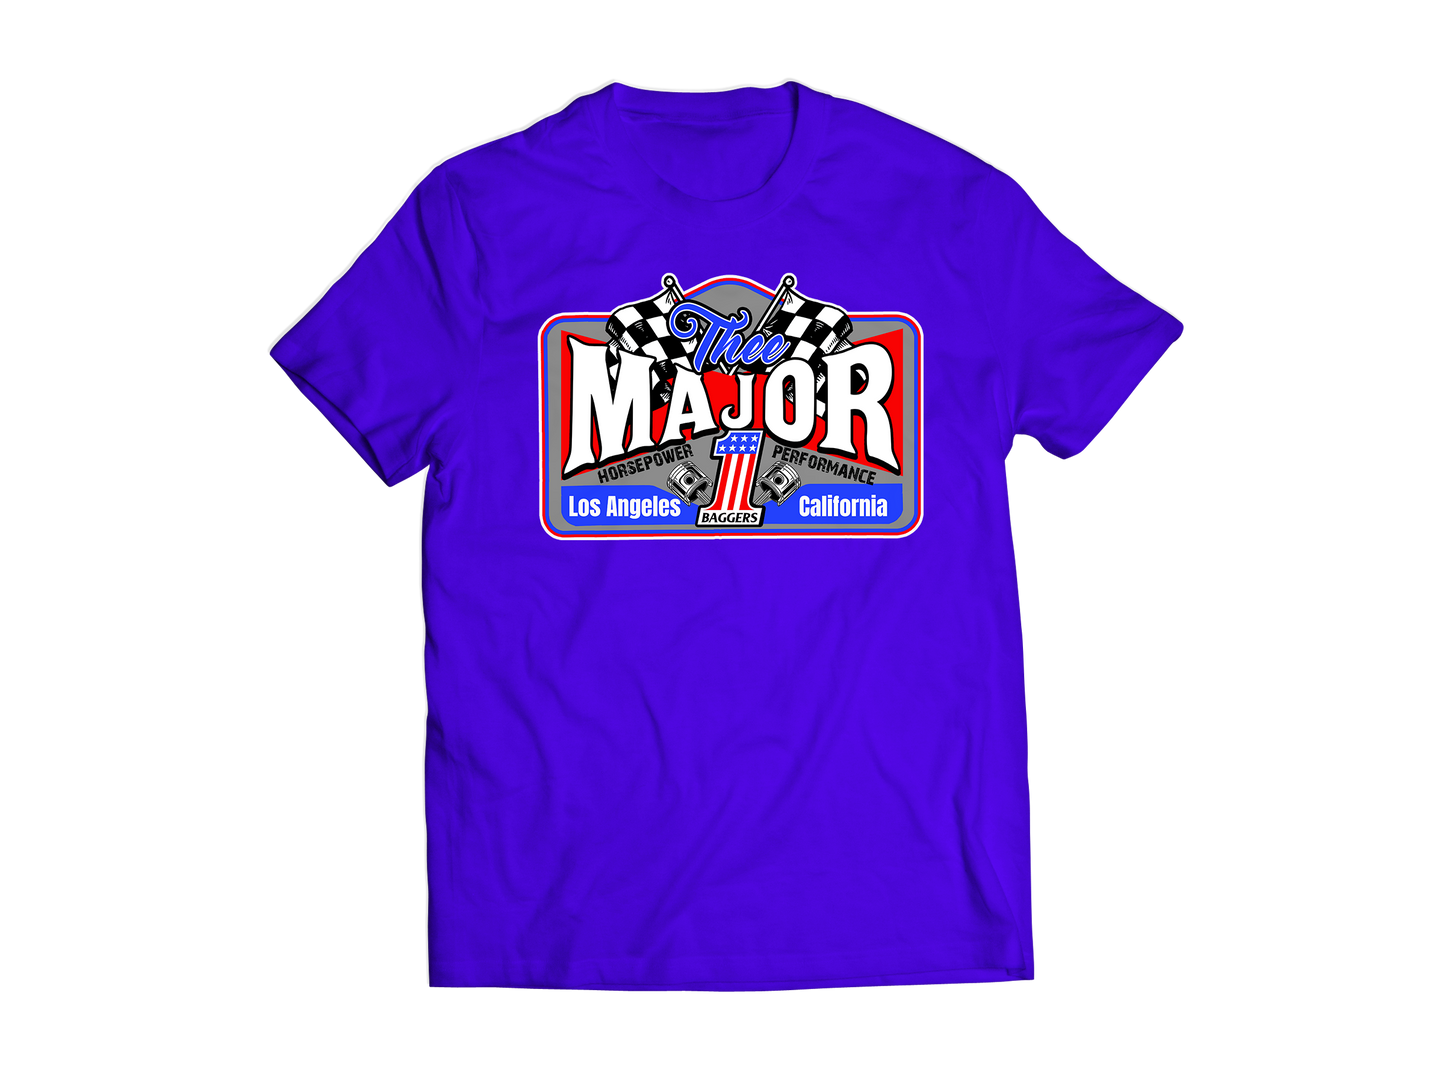 Thee Major